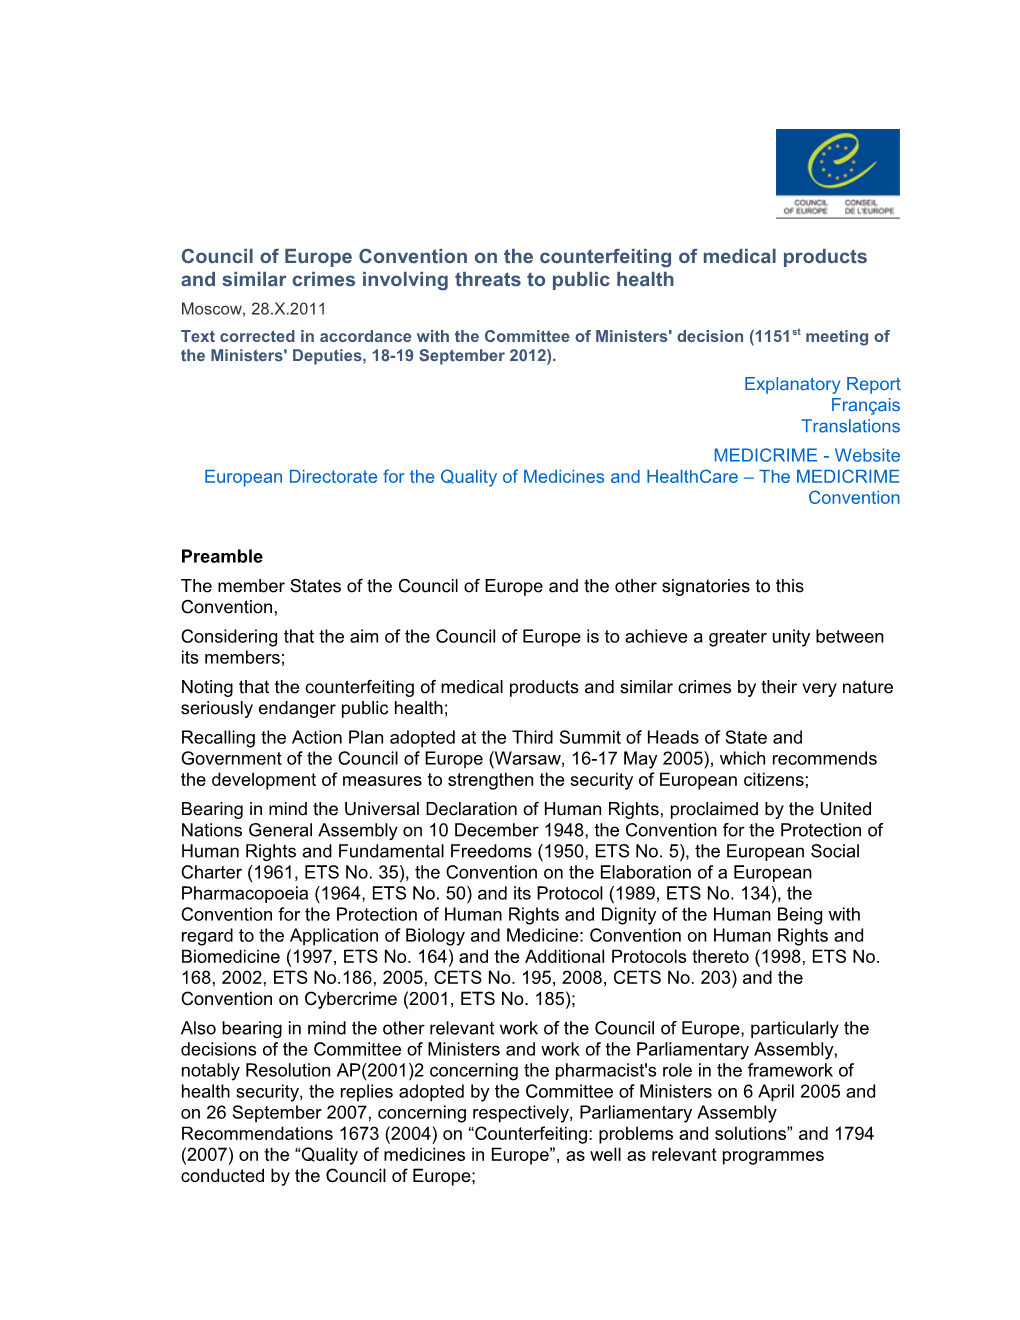 Council of Europe Convention on the Counterfeiting of Medical Products and Similar Crimes